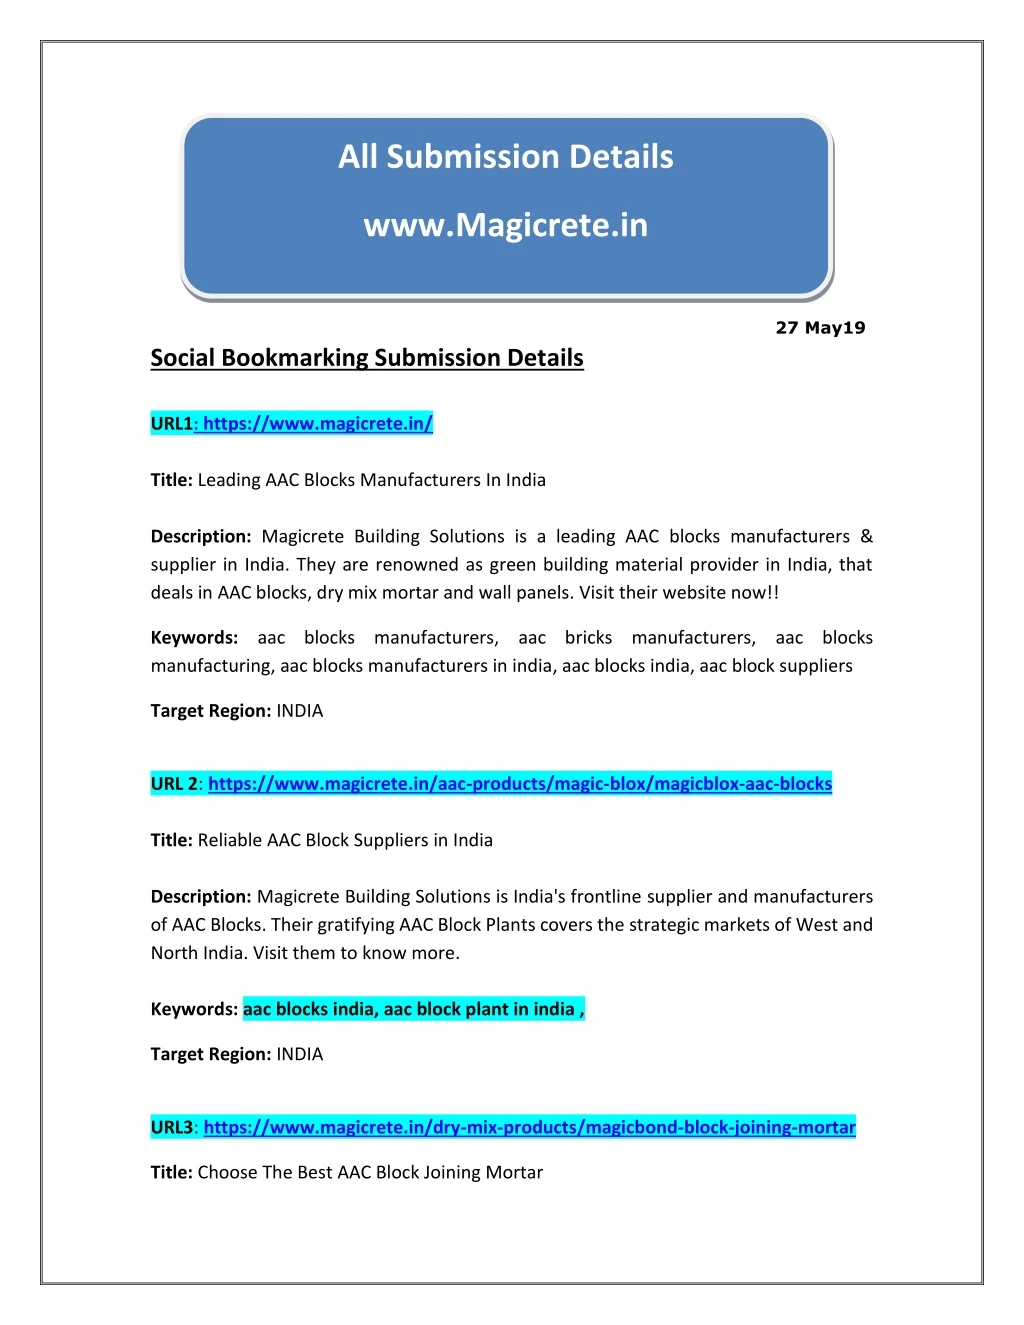 27 may19 social bookmarking submission details